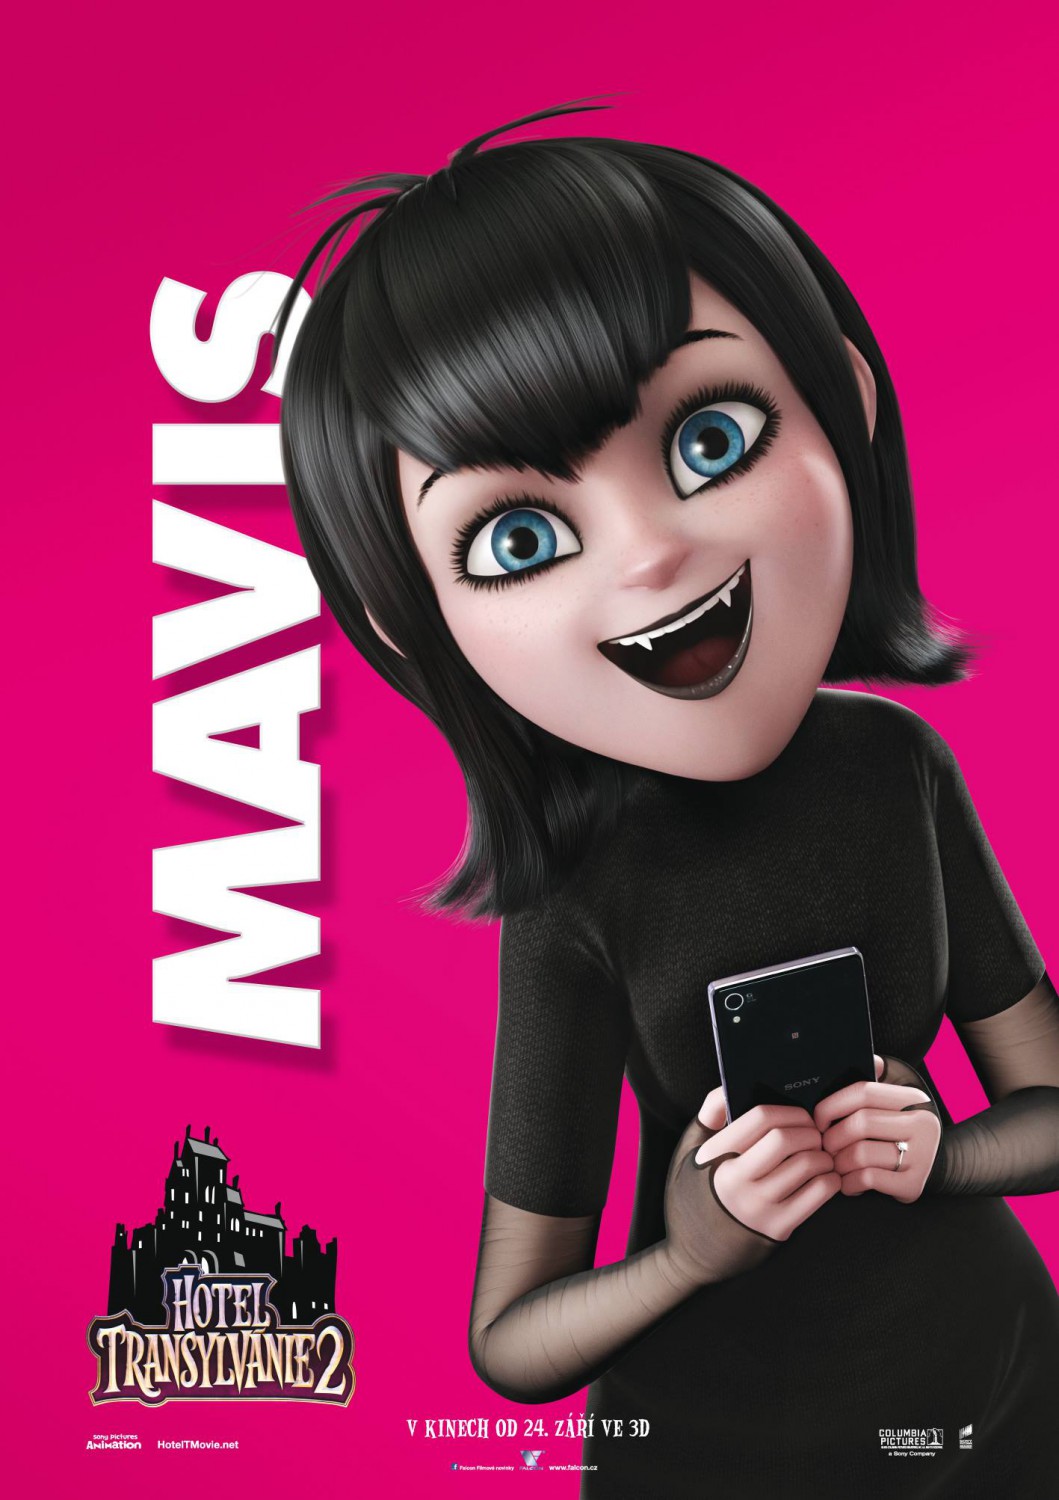 HOTEL TRANSYLVANIA 2 Trailer, Clips, Music Video, Images and Posters ...